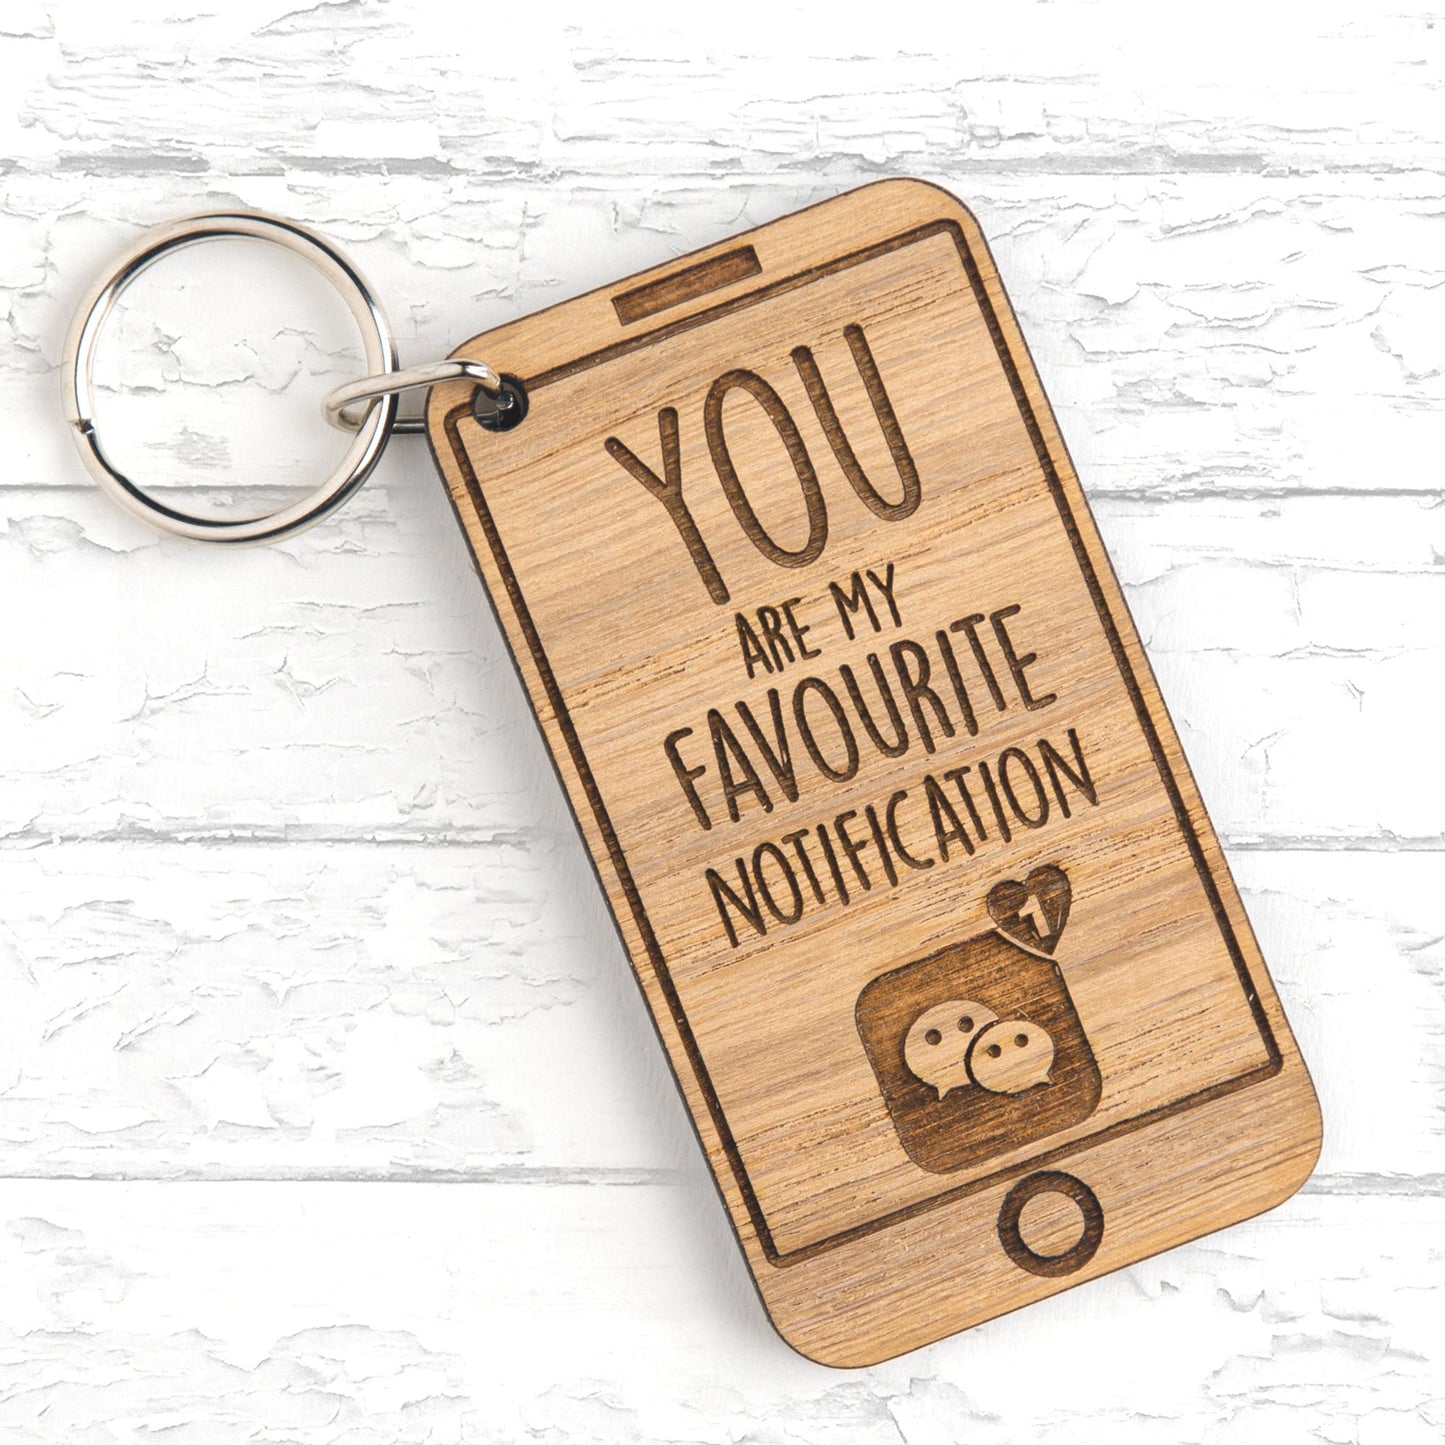 You Are My Favourite NOTIFICATION - Funny Mobile Phone Themed Valentines Day Keyring Gift